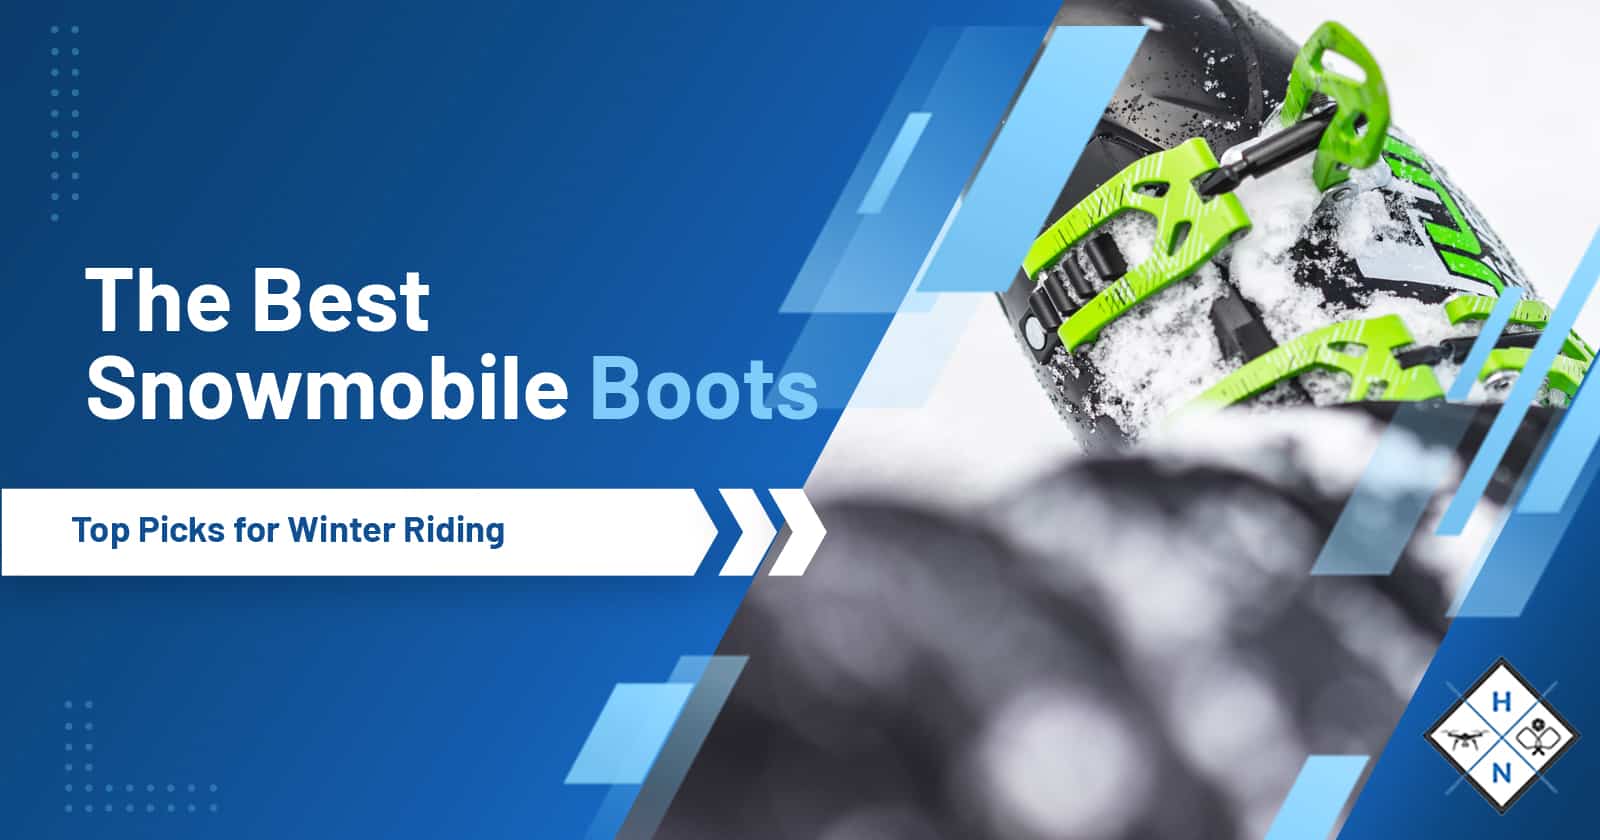 The Best Snowmobile Boots – Top Picks for Winter Riding